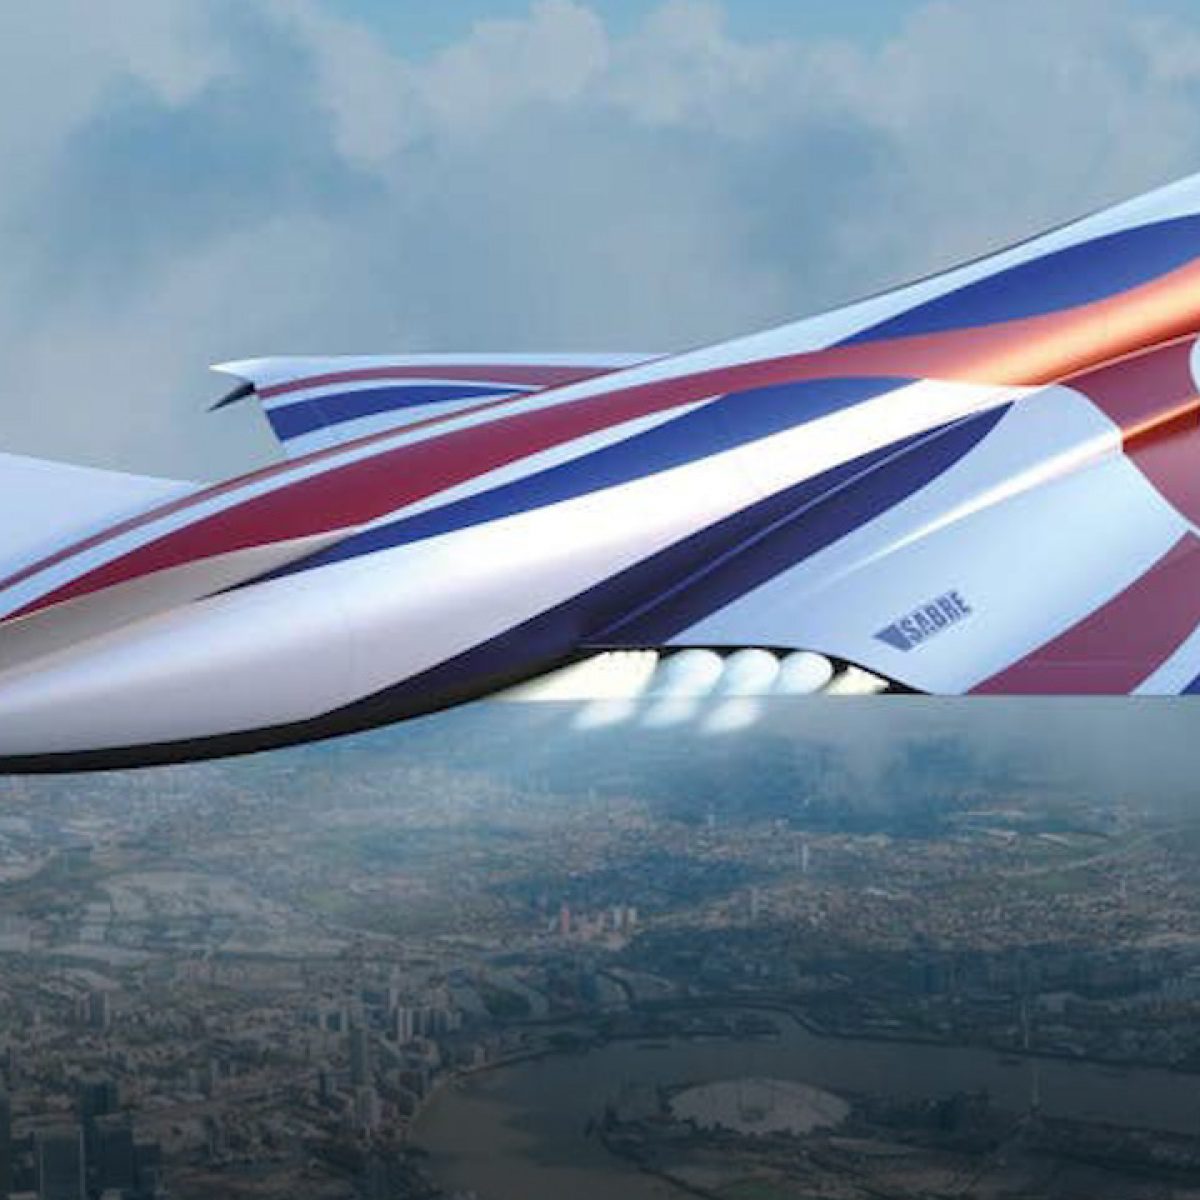 This ‘Space Plane’ Could Fly You From London to New York in Only 1 Hour (Video)